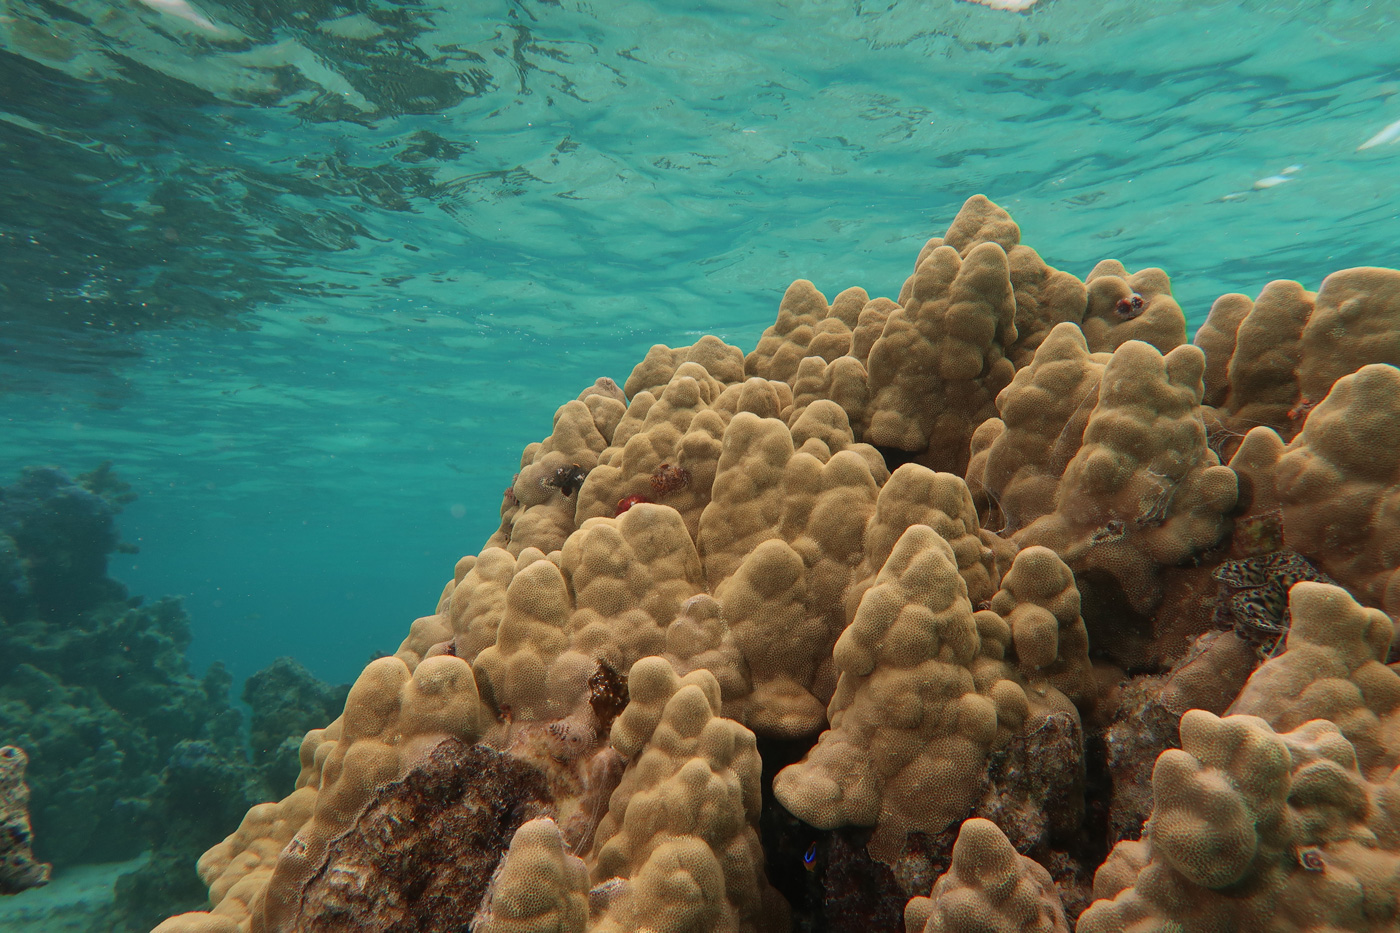 A photo of a lumpy orange coral colony taken from underwater.